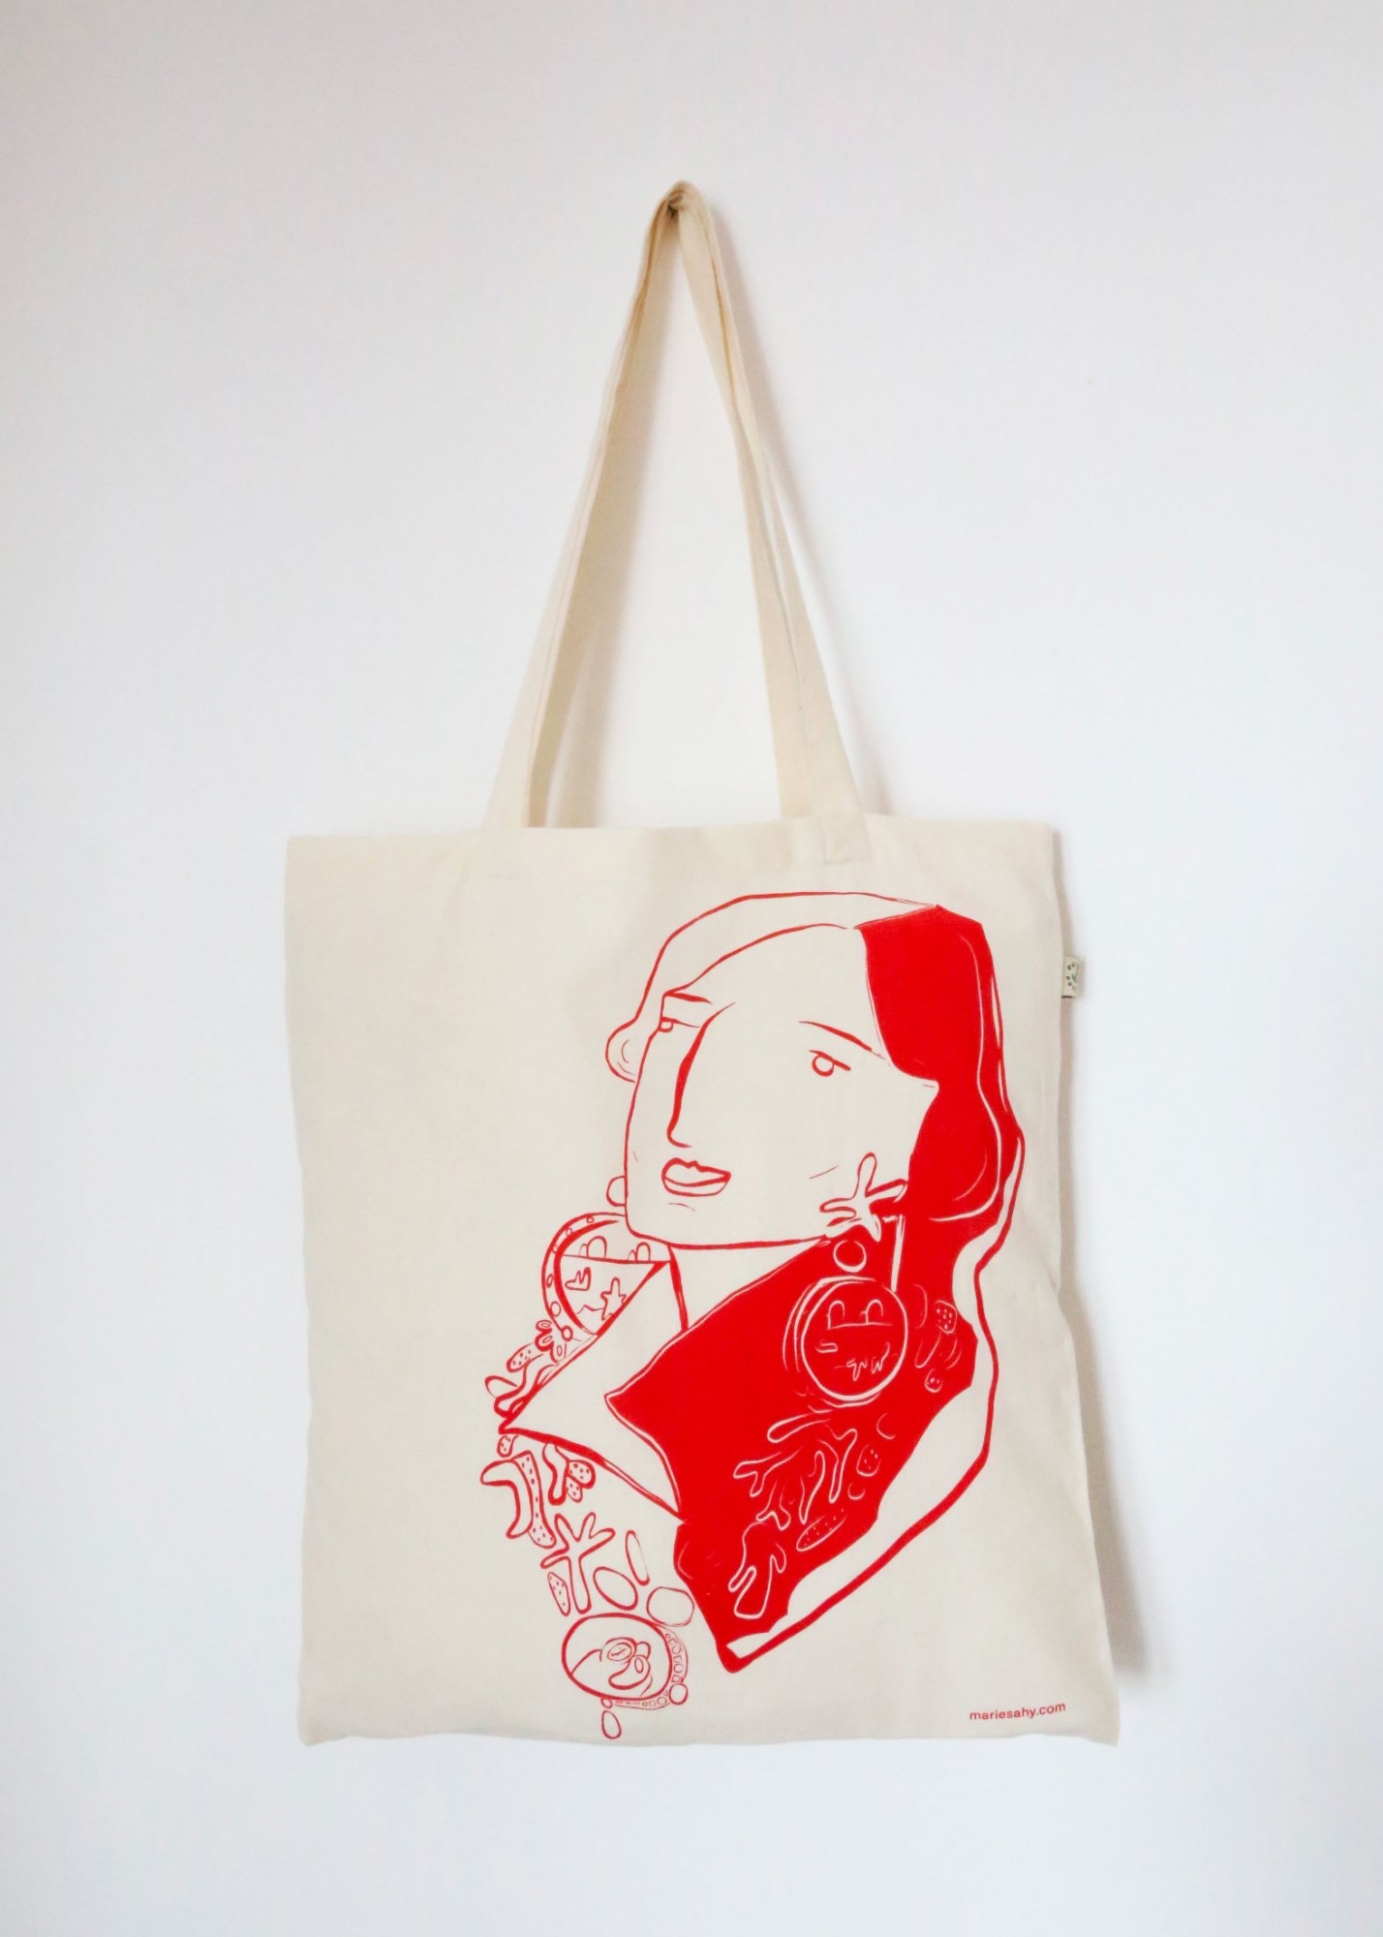 Printed t-shirts and tote bags